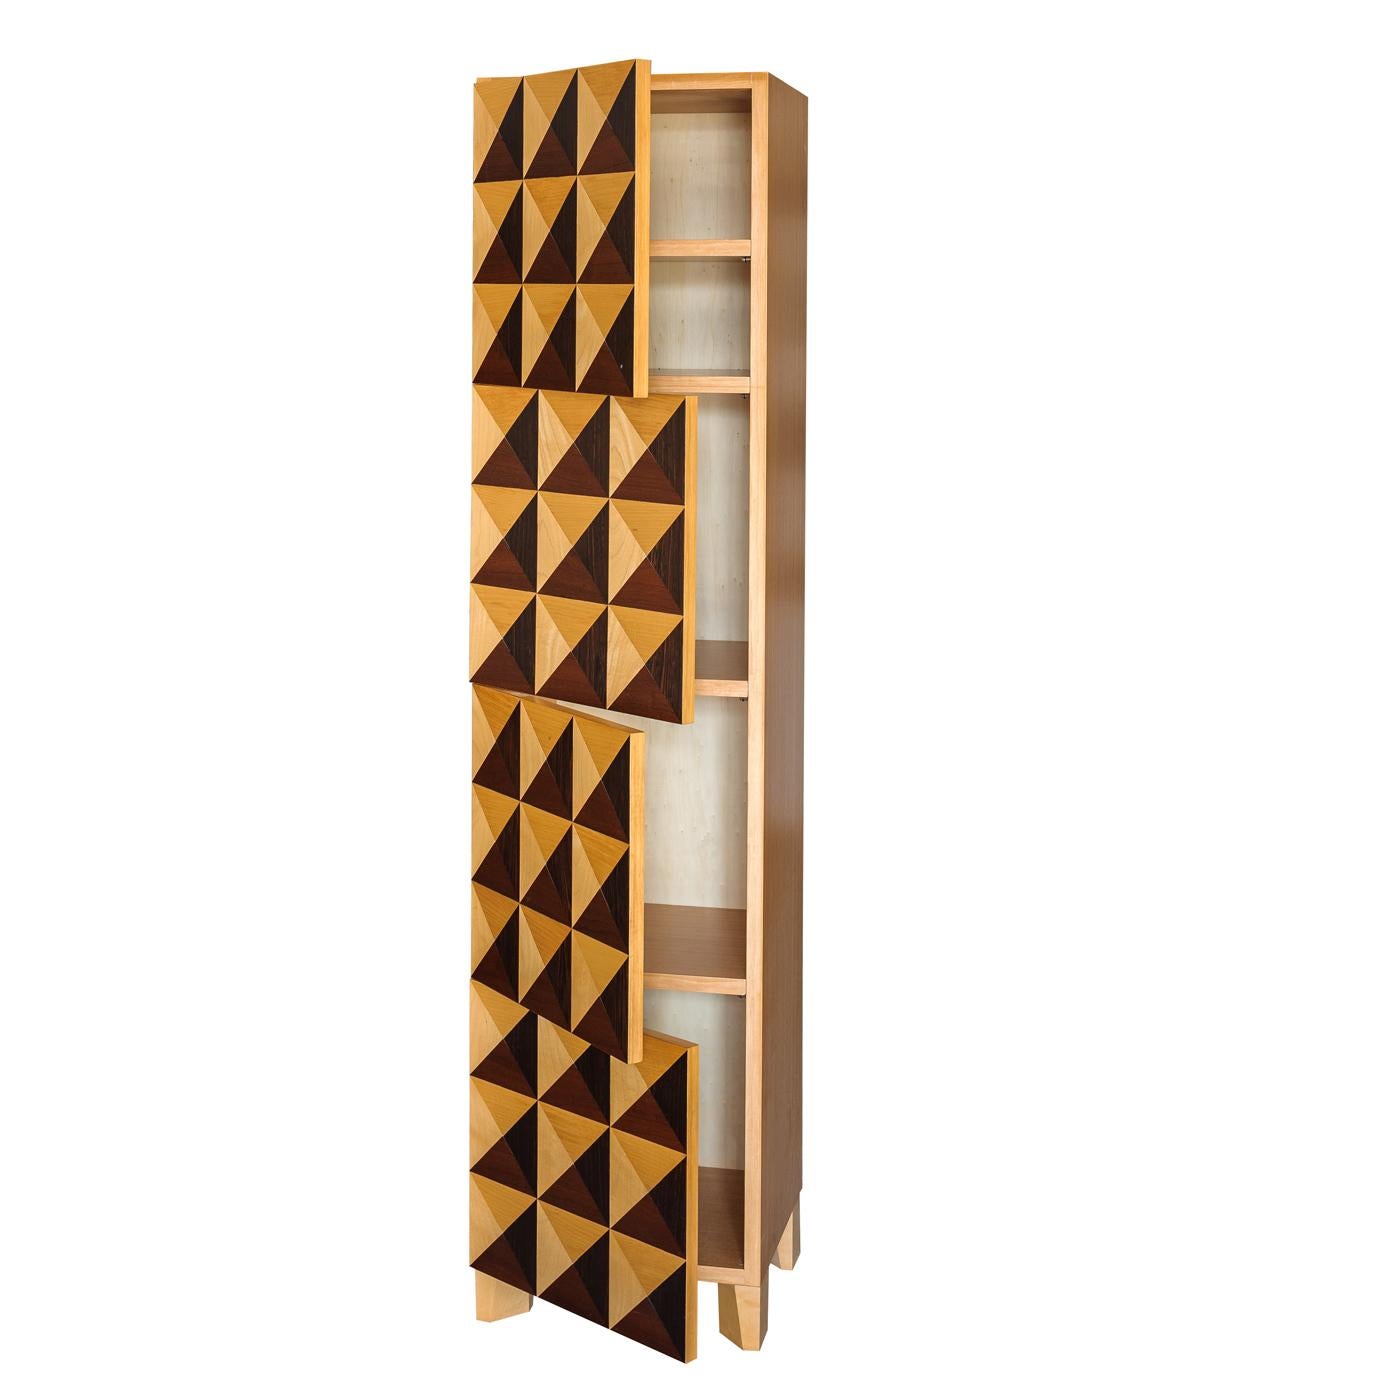 A stunning exemplar of modern furniture, this superb cabinet blurs the lines between abstraction and cabinetmaking to create an architectural work of art. Fashioned entirely of anigre wood, the rectangular structure's front panel is composed of a